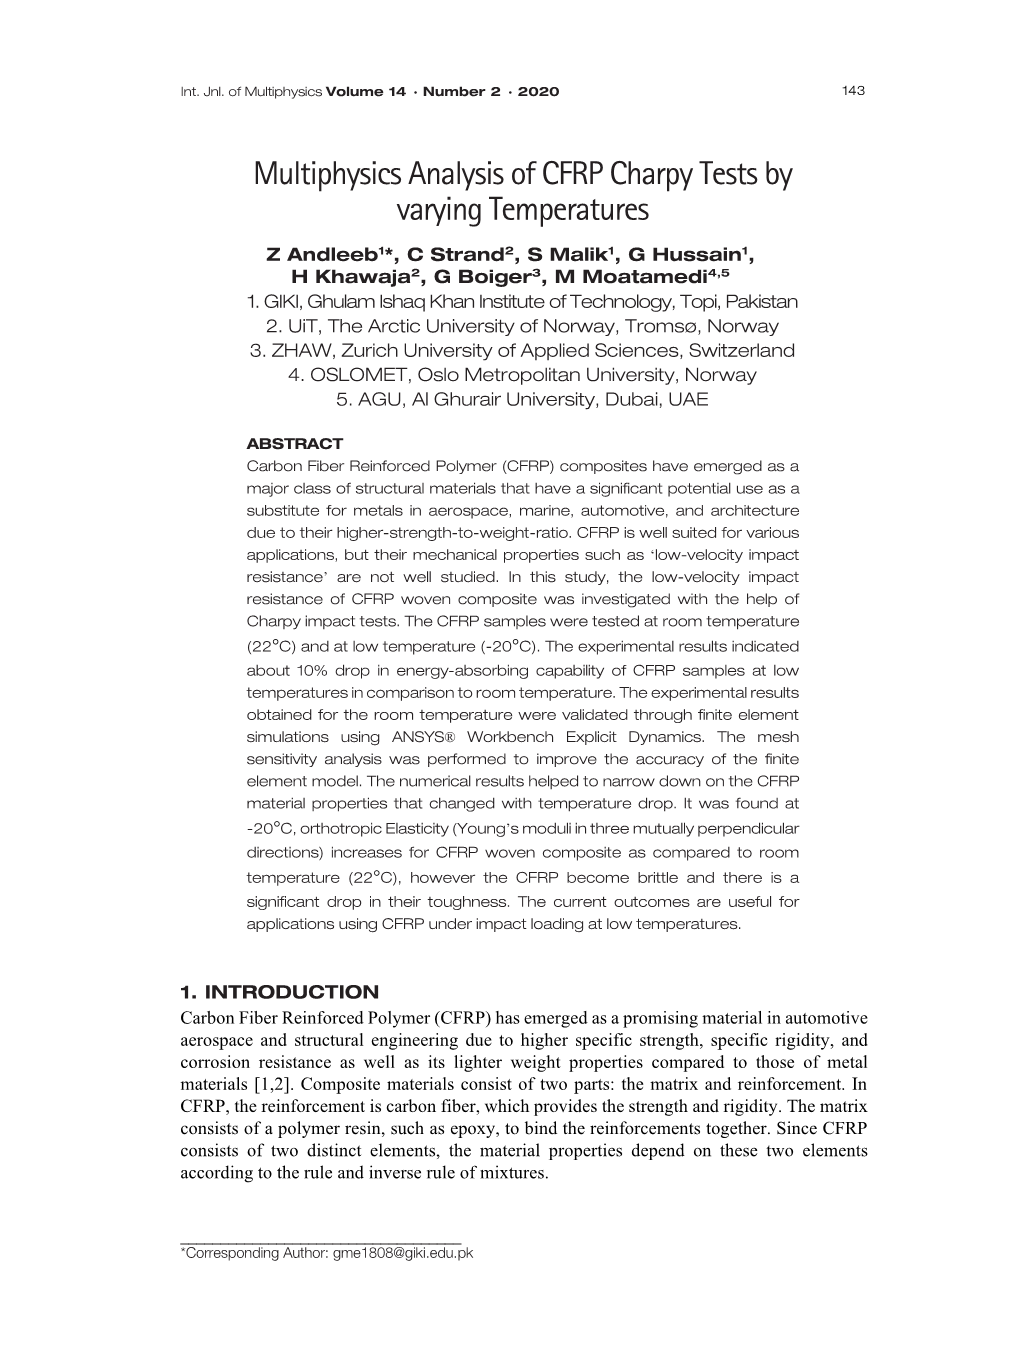 Multiphysics Analysis of CFRP Charpy Tests by Varying Temperatures